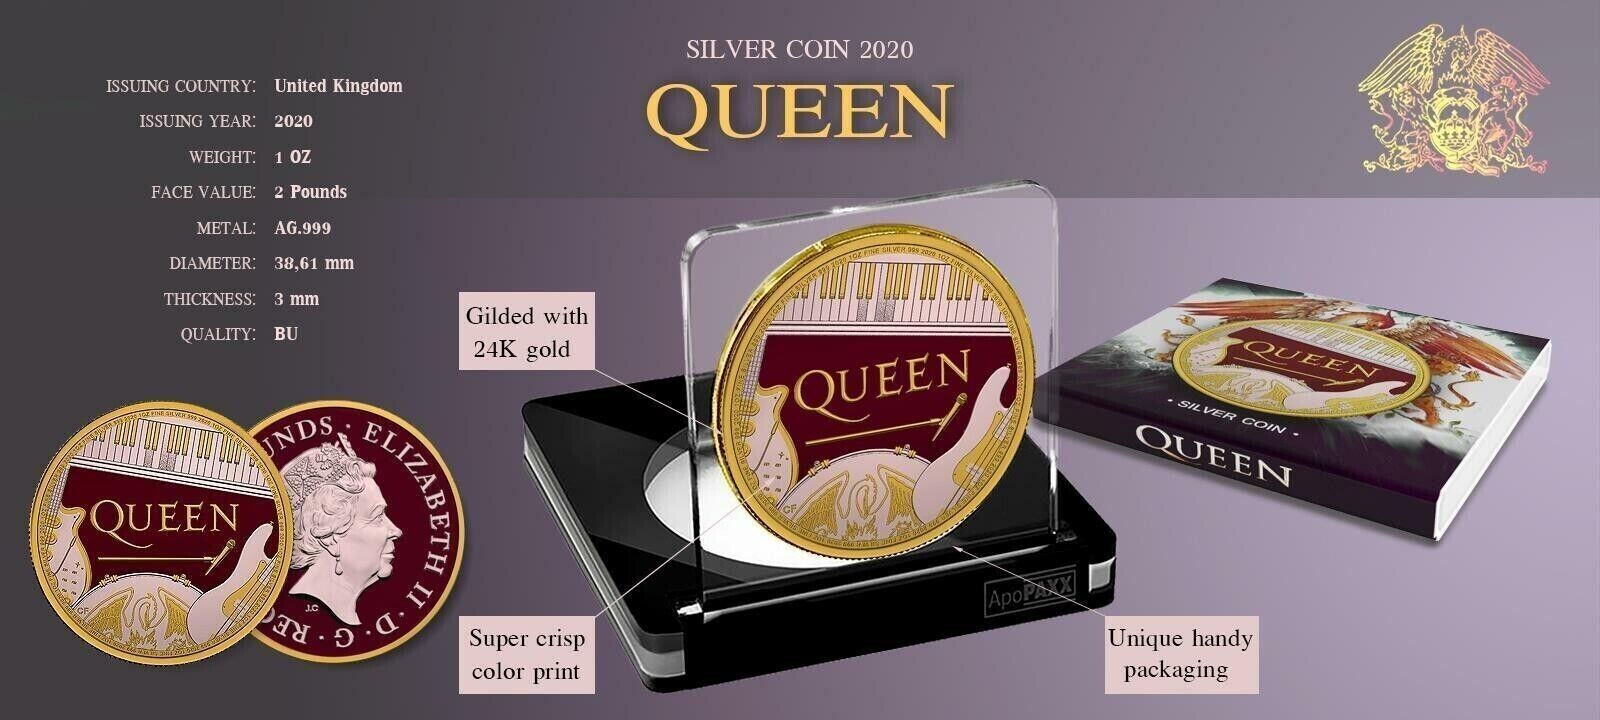 1 Oz Silver Coin 2020 UK £2 Queen Music Rock Band Colored Gilded Coin-classypw.com-4